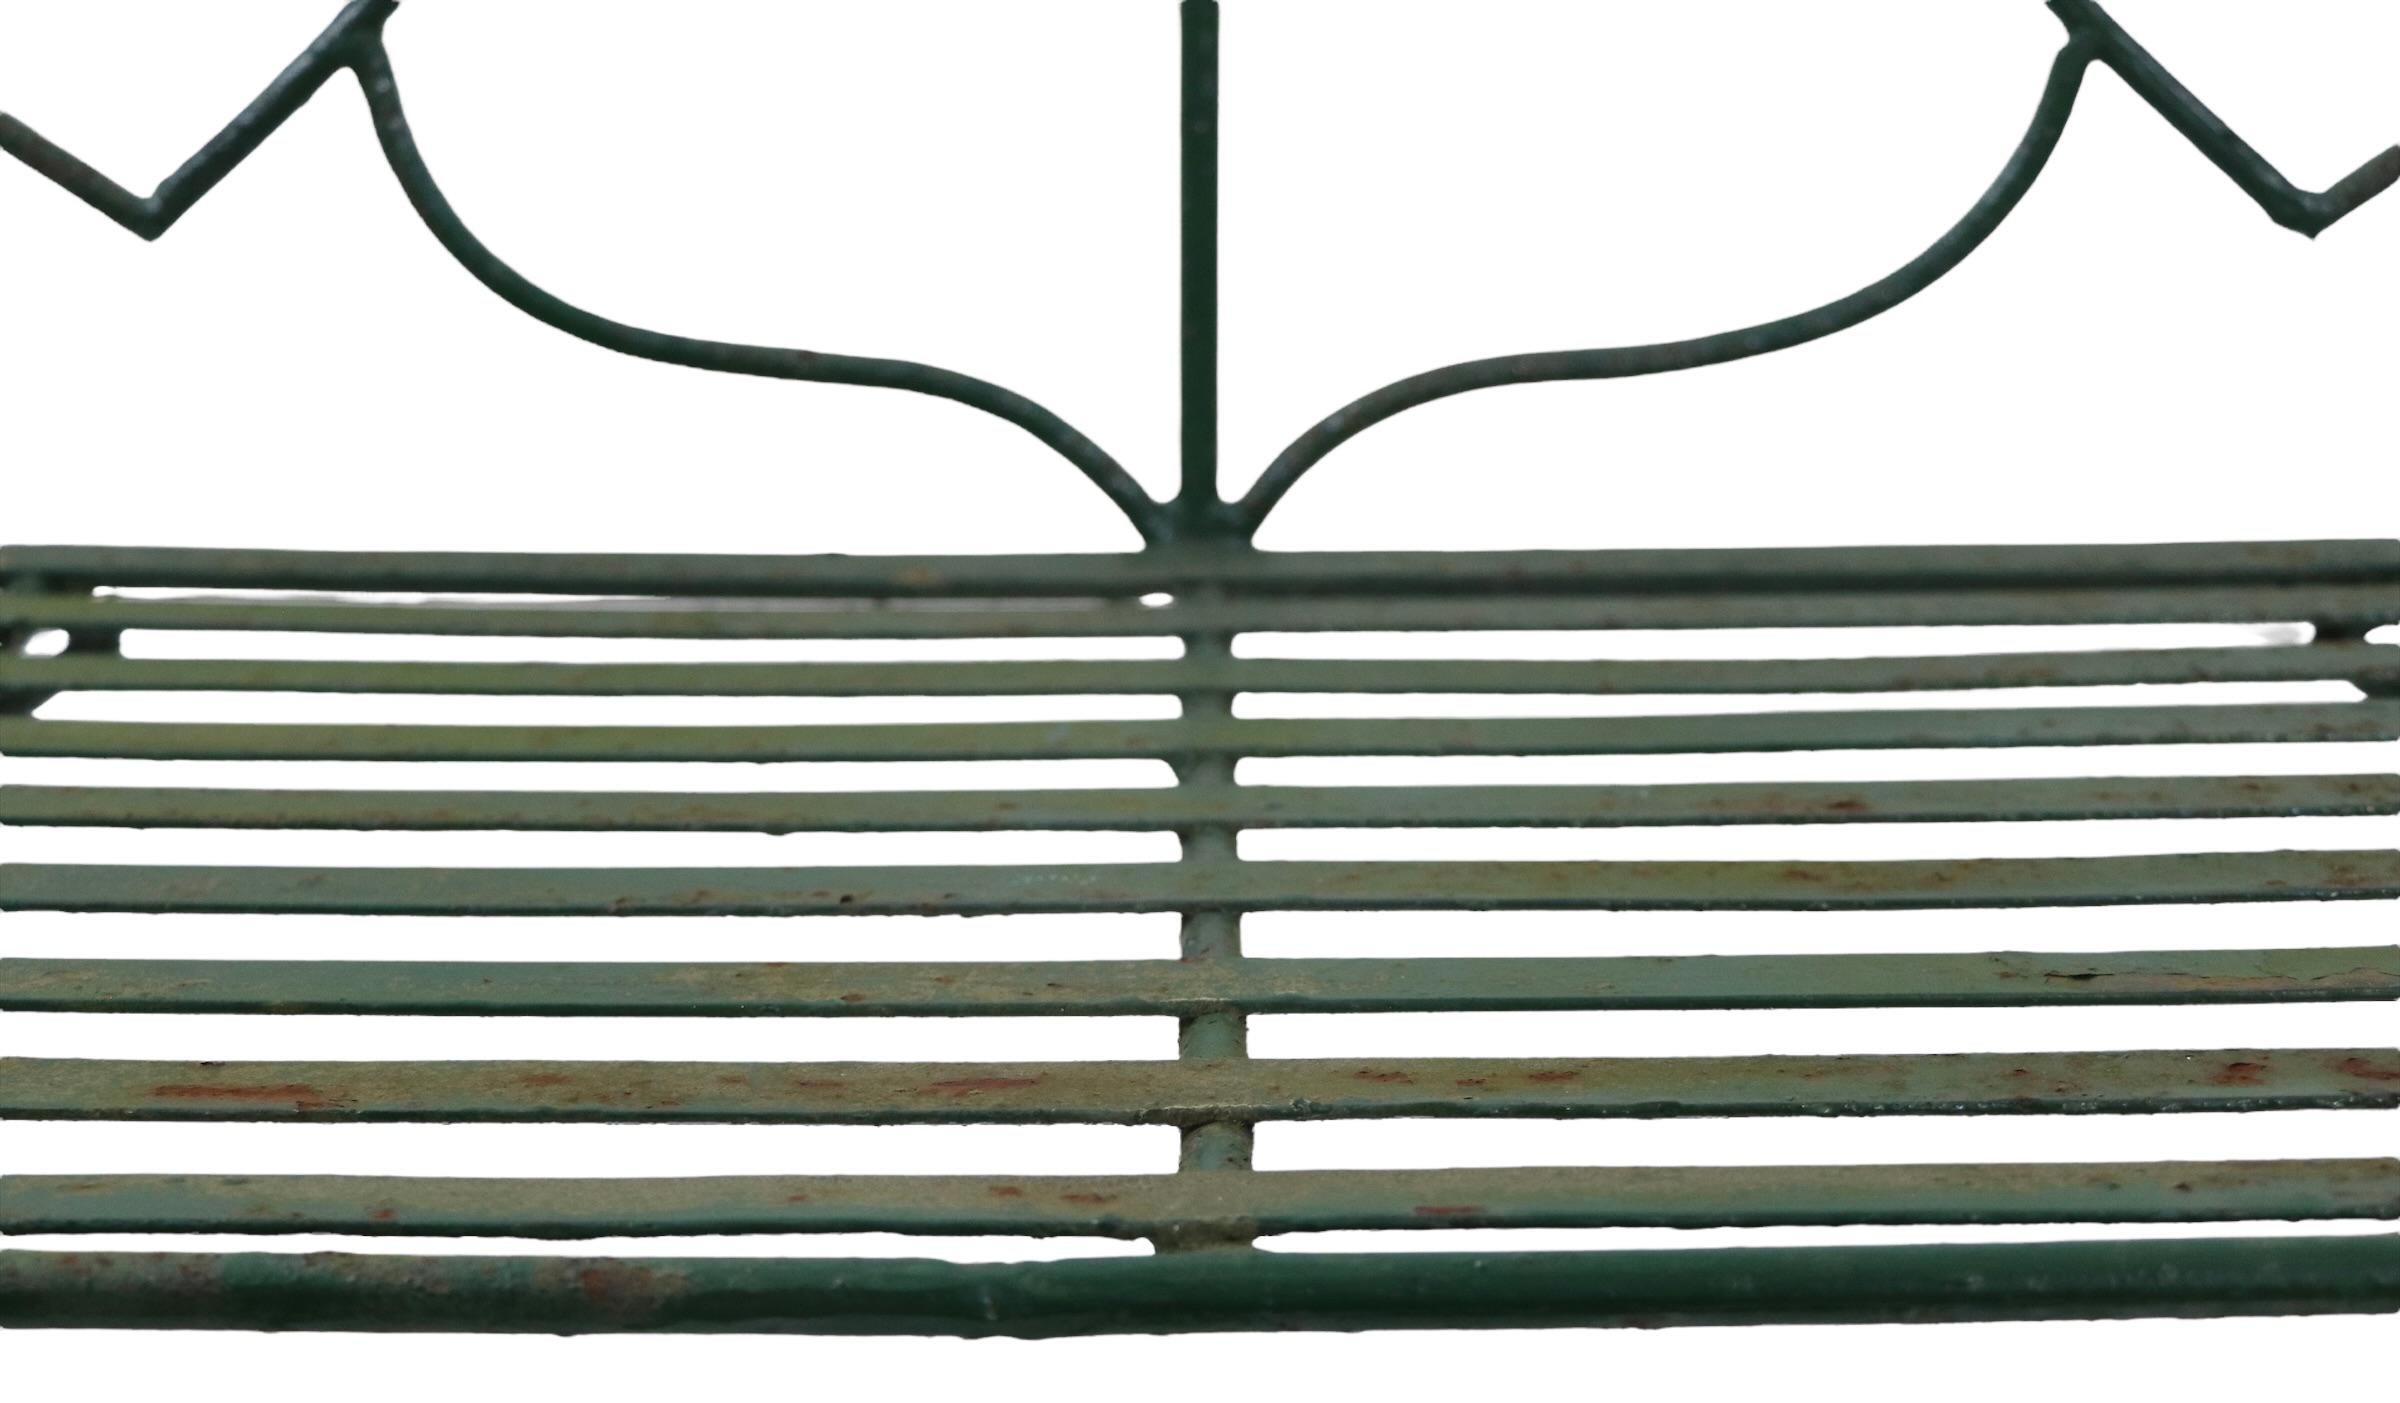 Hand Wrought Iron Settee Bench W Decorative Heart Shaped Metalwork Backrest  5